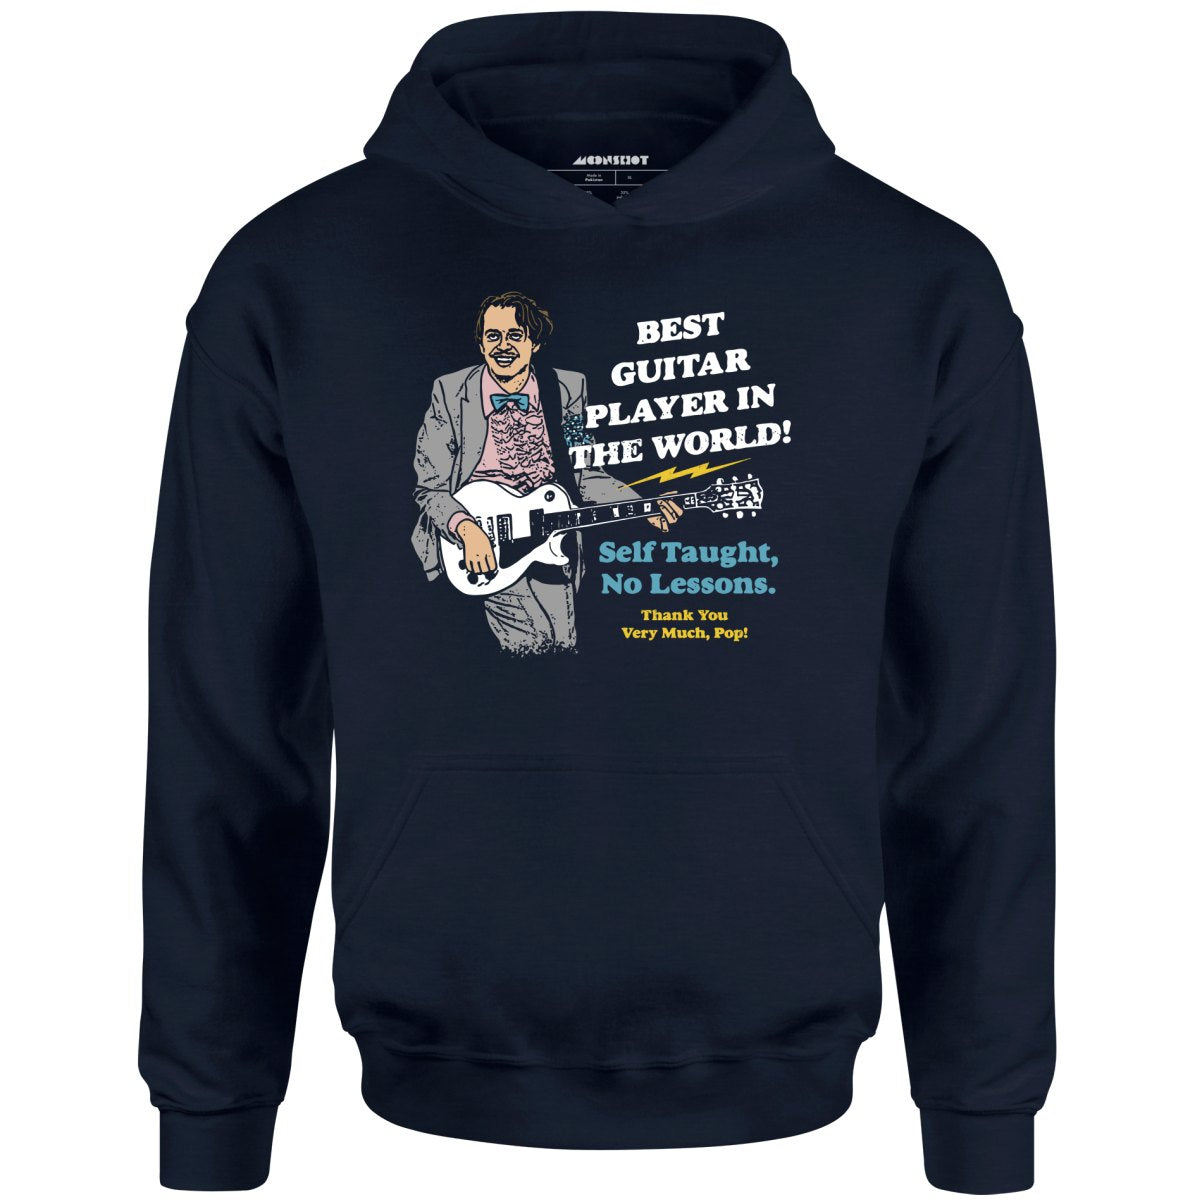 Best Guitar Player in The World! - Unisex Hoodie